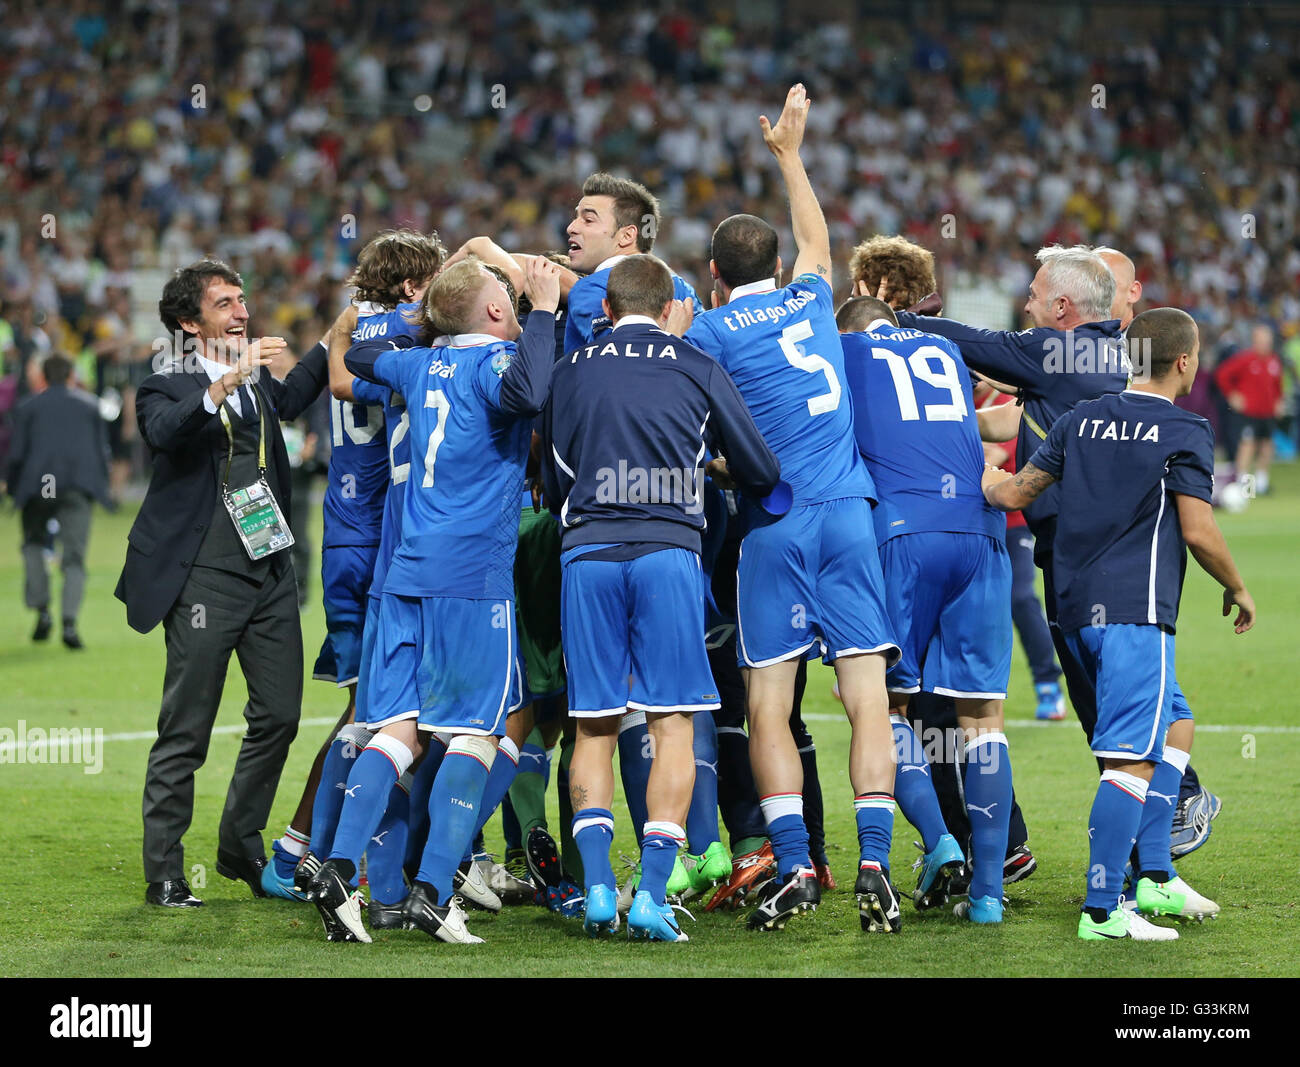 KYIV, UKRAINE - JUNE 24, 2012: Players of Italy national football team celebrate their winning after the UEFA EURO 2012 Quarter-final game against England at NSC Olympic stadium in Kyiv Stock Photo